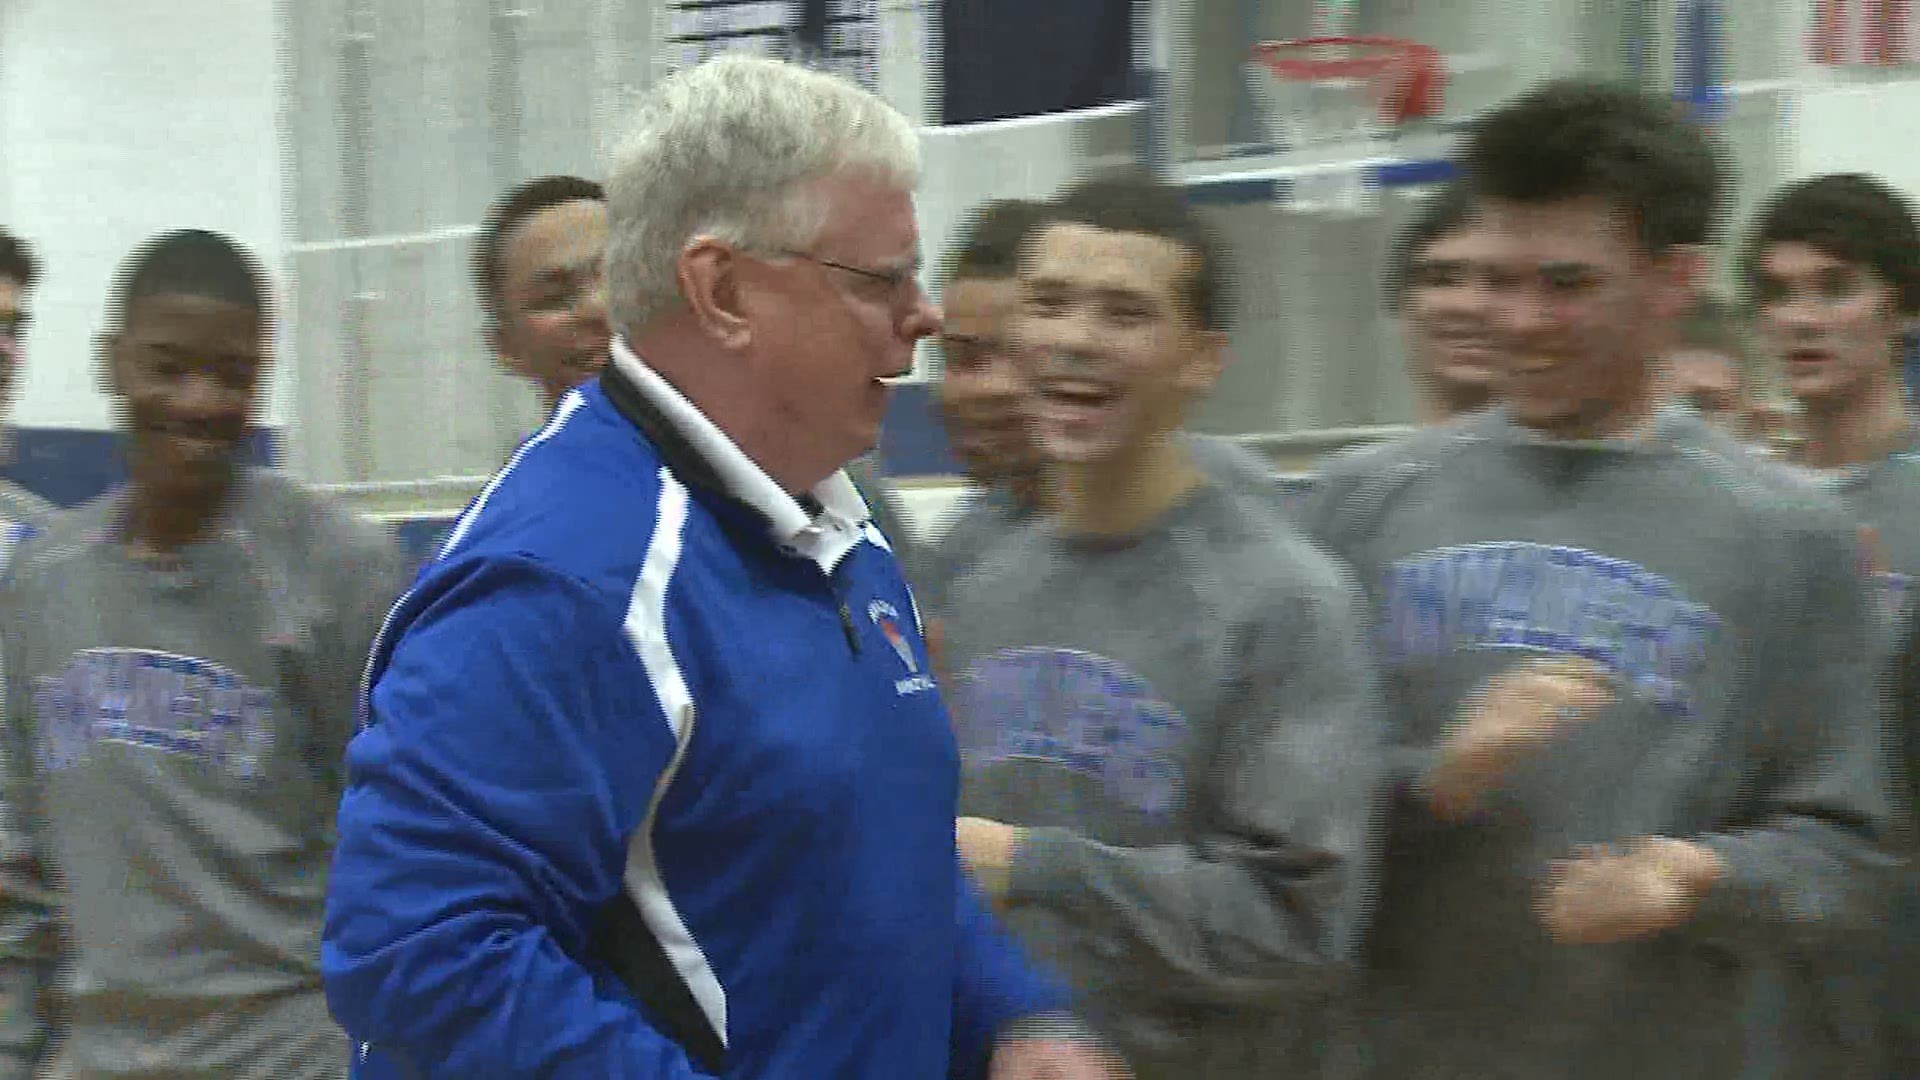 West Scranton boys basketball coach Jack Lyons picked up career victory #500 with a win over Valley View,